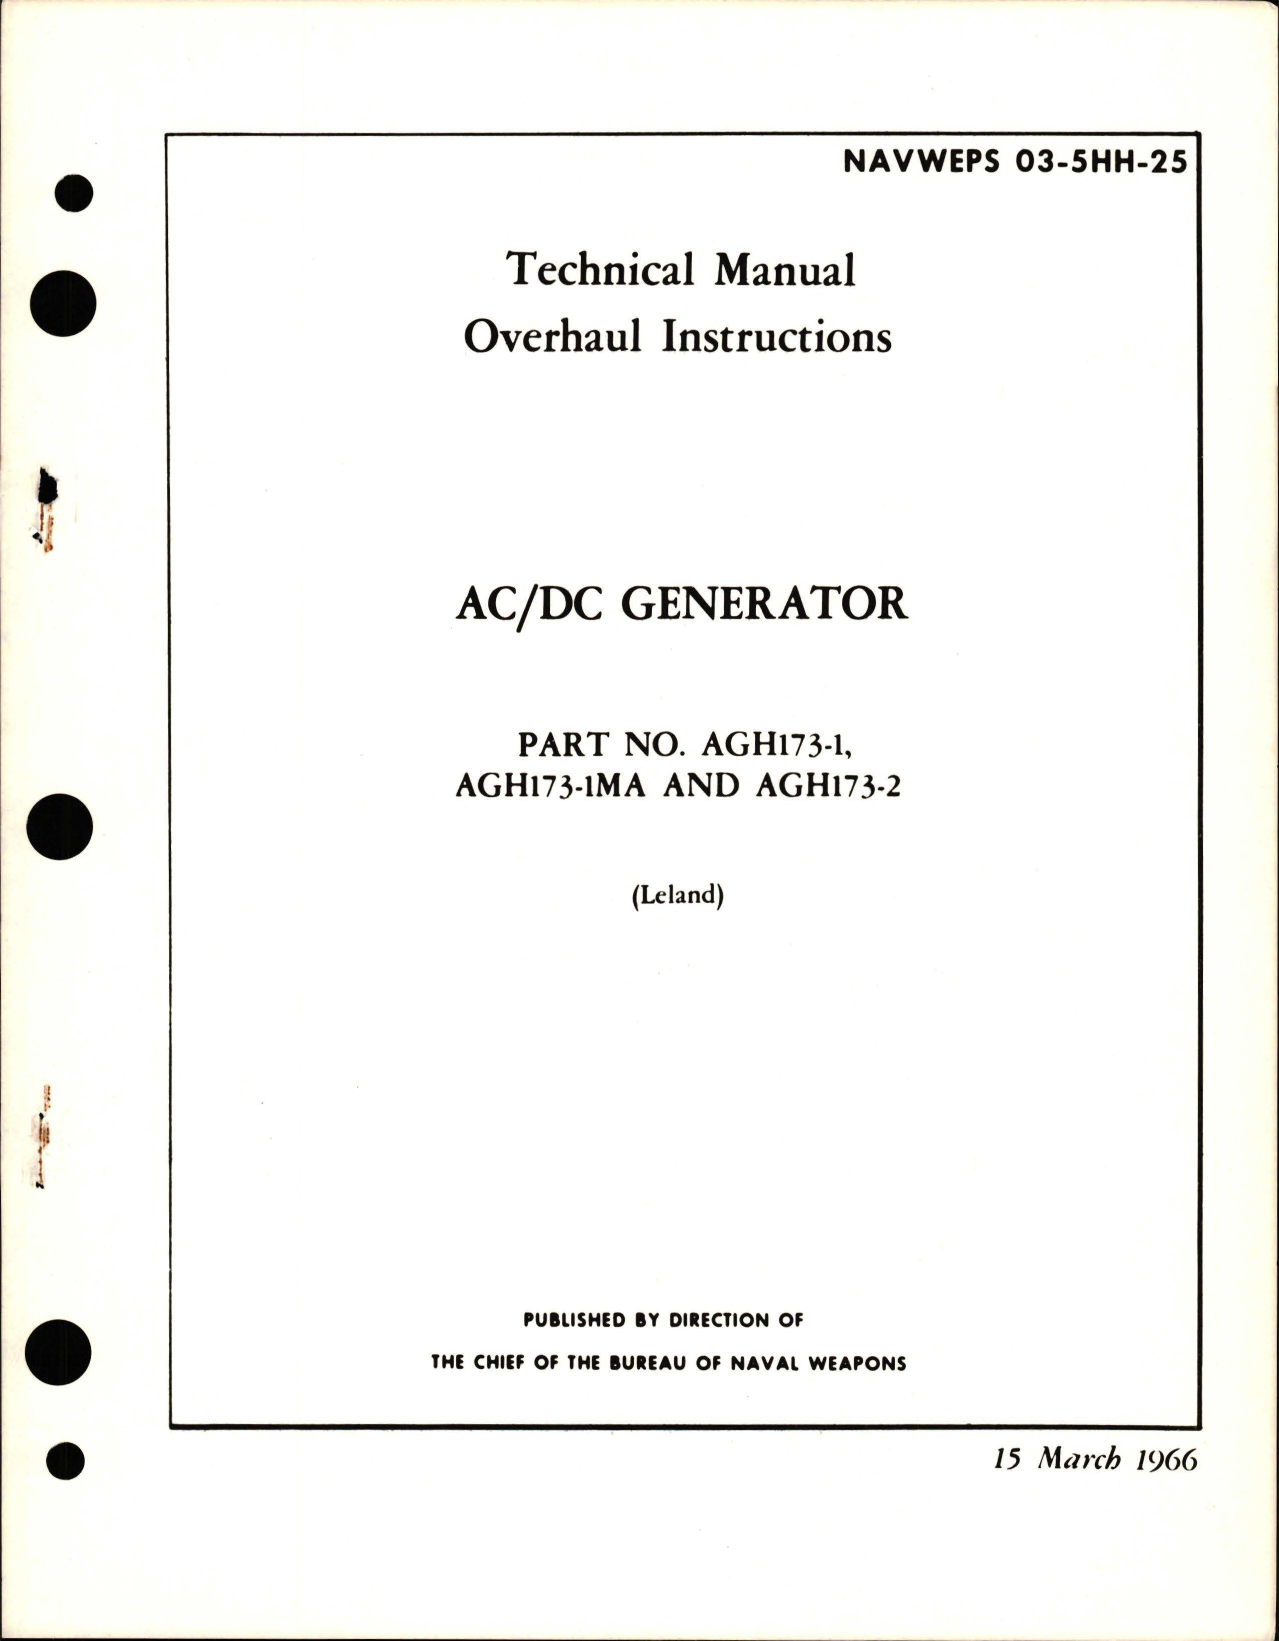 Sample page 1 from AirCorps Library document: Overhaul Instructions for AC-DC Generator - Part AGH173-1, AGH173-1MA and AGH173-2